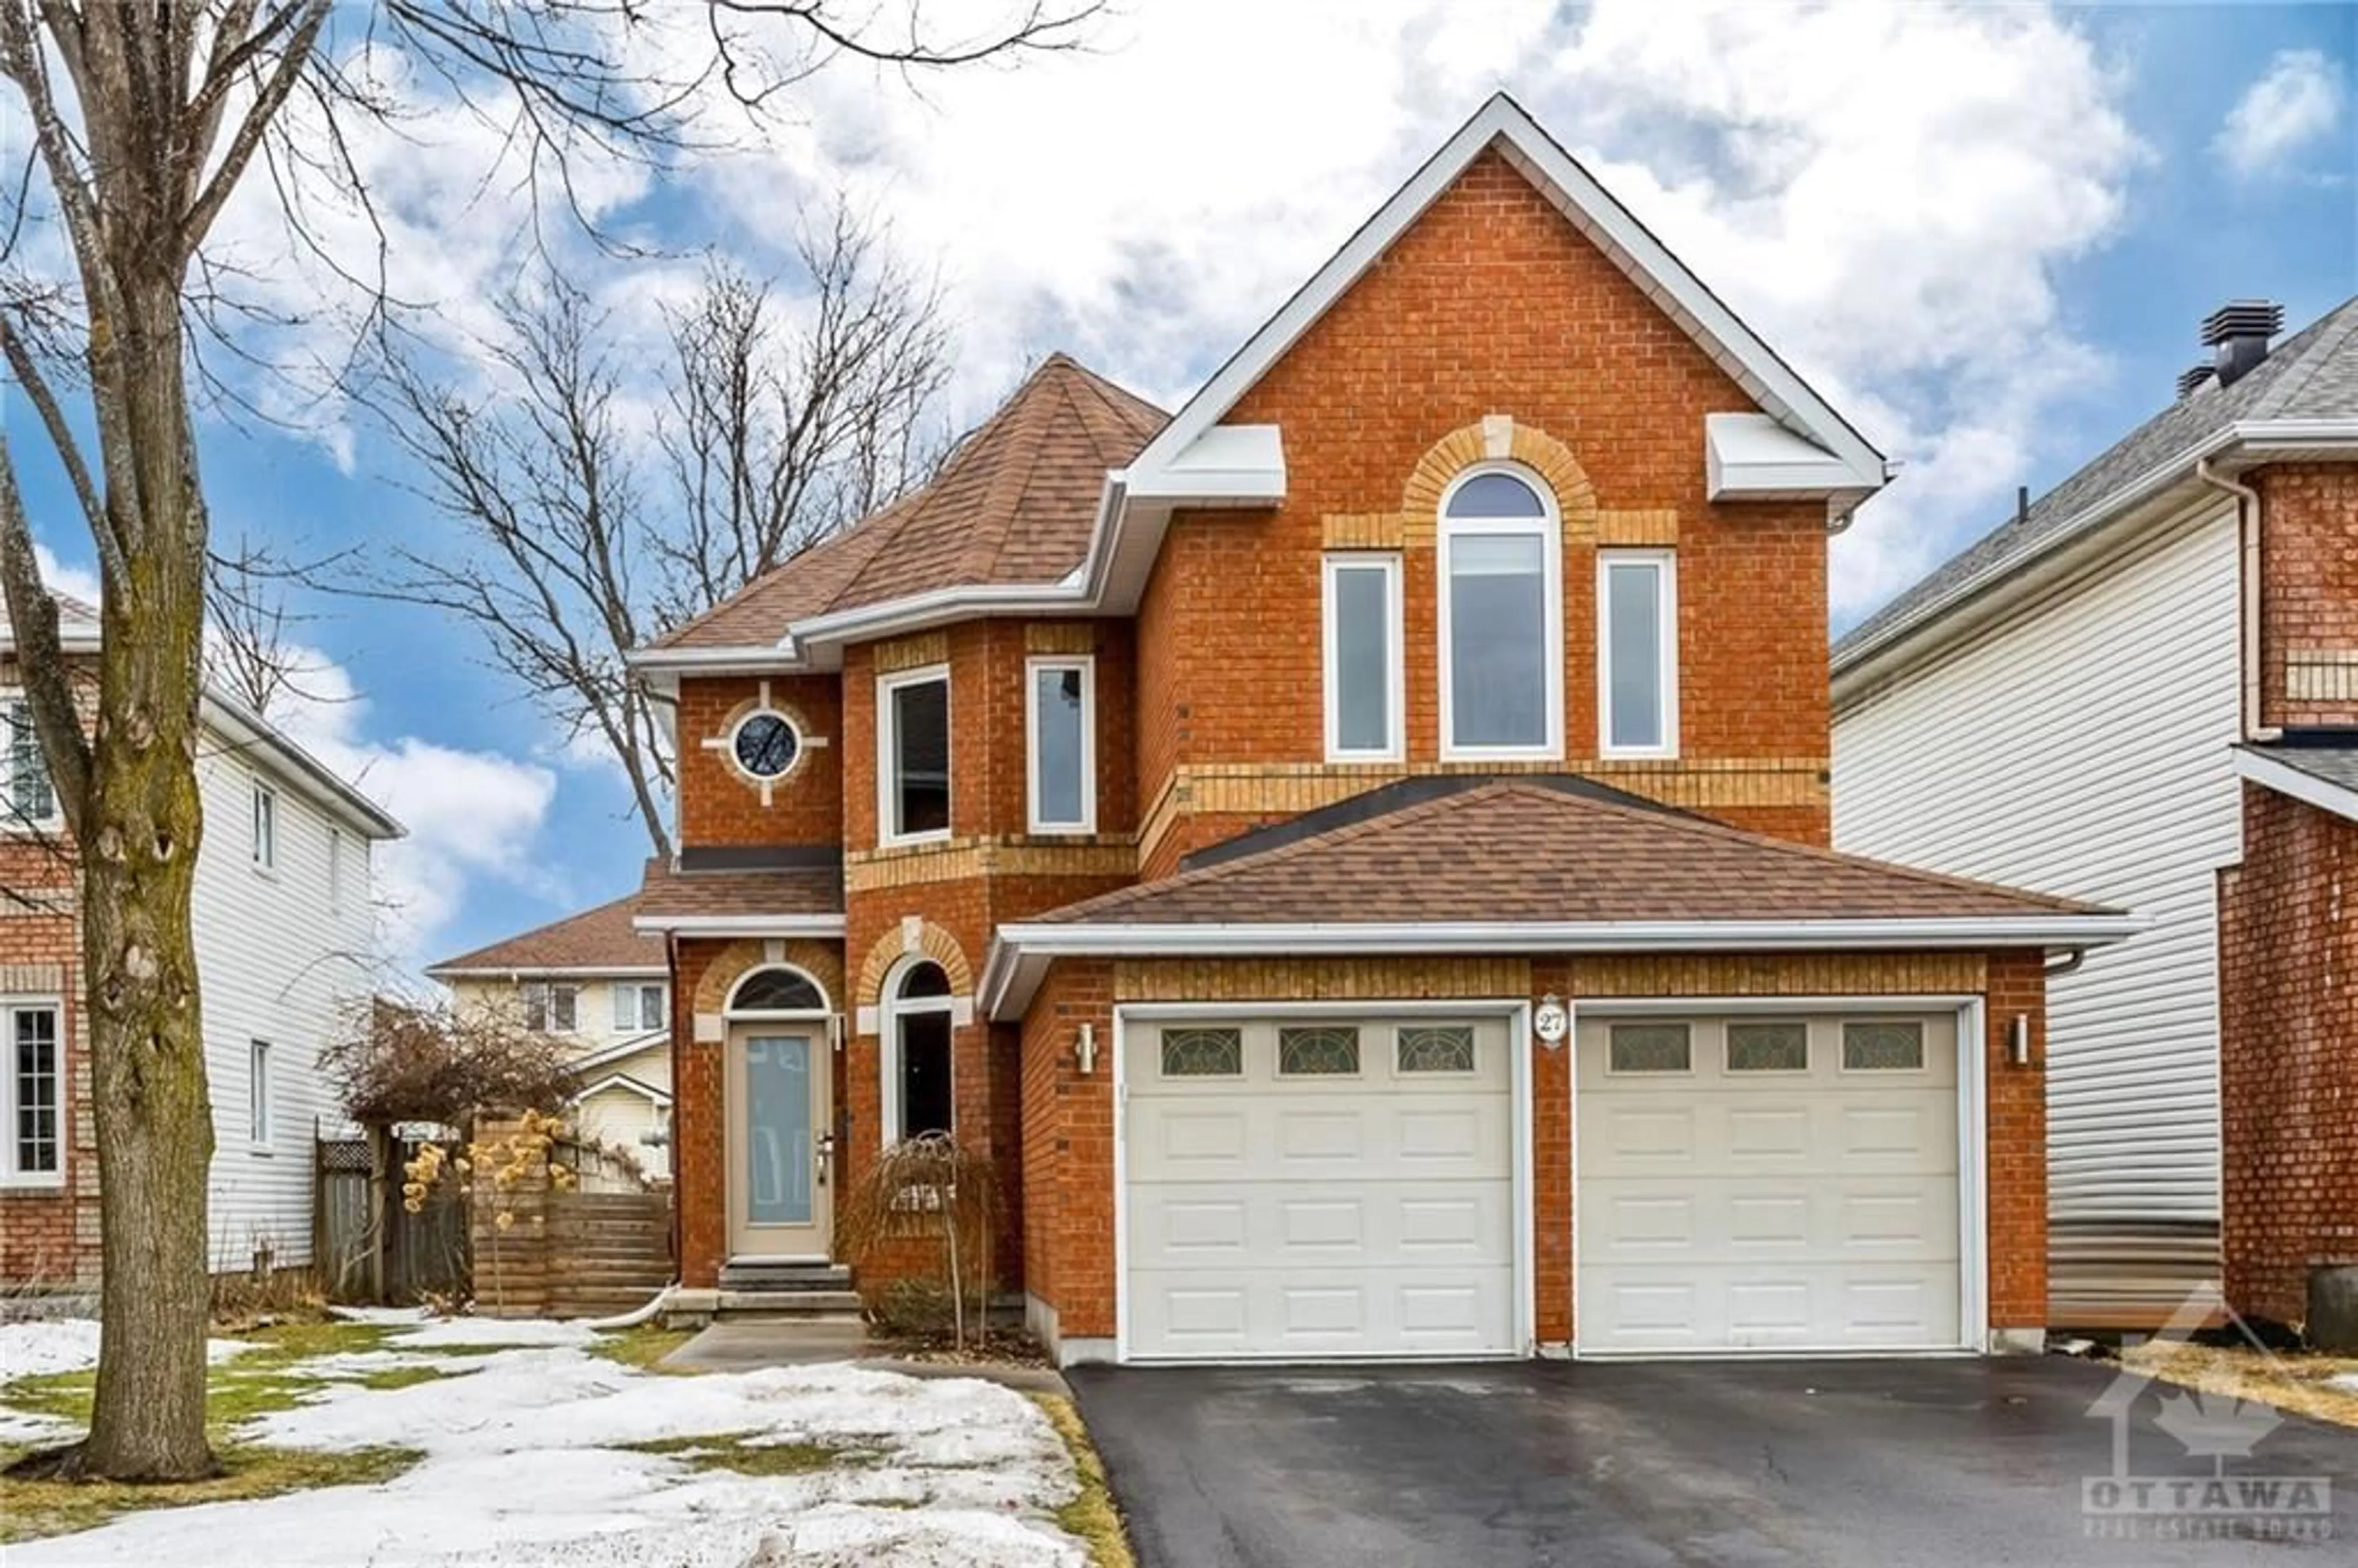 Home with brick exterior material for 27 DEWBERRY Cres, Ottawa Ontario K2J 4N3